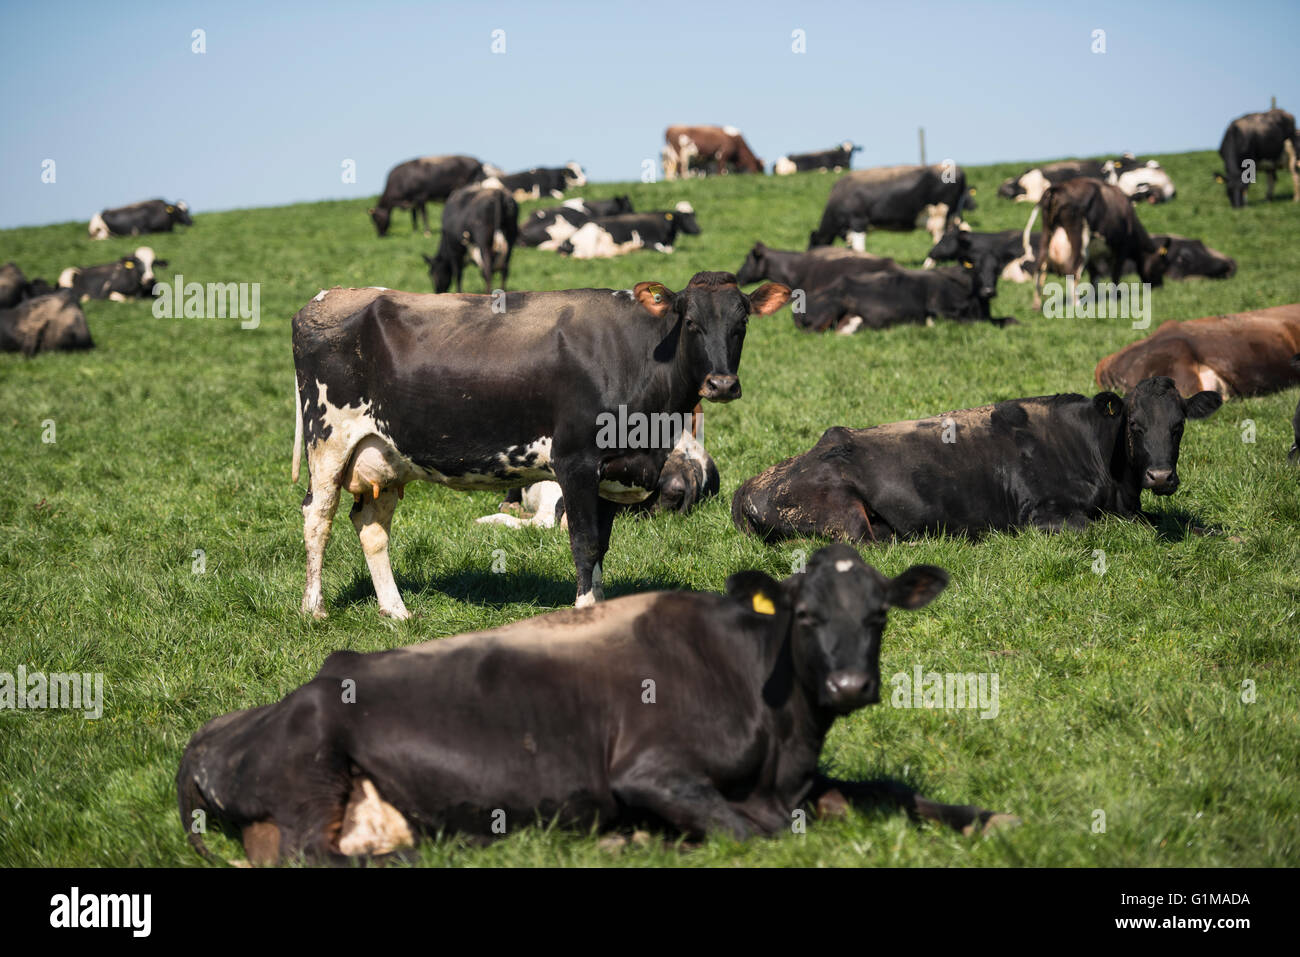 Black and White dairy cows in a grass field. Lancashire. UK Stock Photo